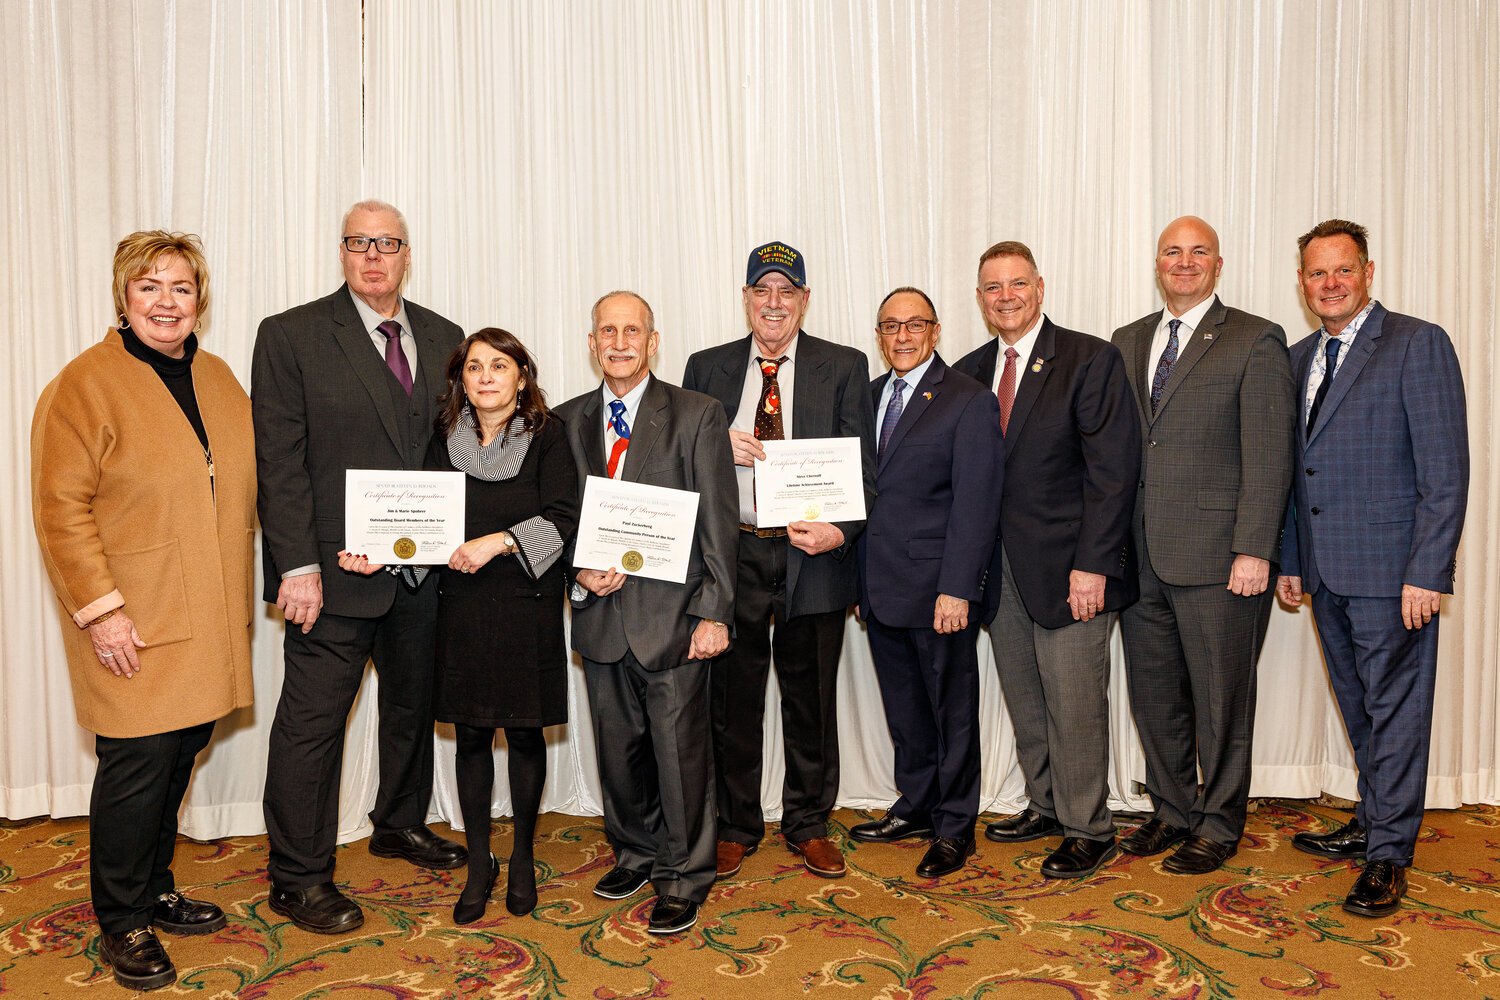 At the Chamber of Commerce of the Bellmore’s annual installation dinner, several community members were honored. Above. Hempstead Town Clerk Kate Murray; Jim and Marie Spohrer, the Chamber Members of the Year; Paul Zuckerberg, the Outstanding Community Person of the Year; Steve Chernoff, recipient of the Lifetime Achievement Award; Legislator Michael Giangregorio; State Sen. Steve Rhoads; Councilman Chris Carini and Chamber President Gene Judd.